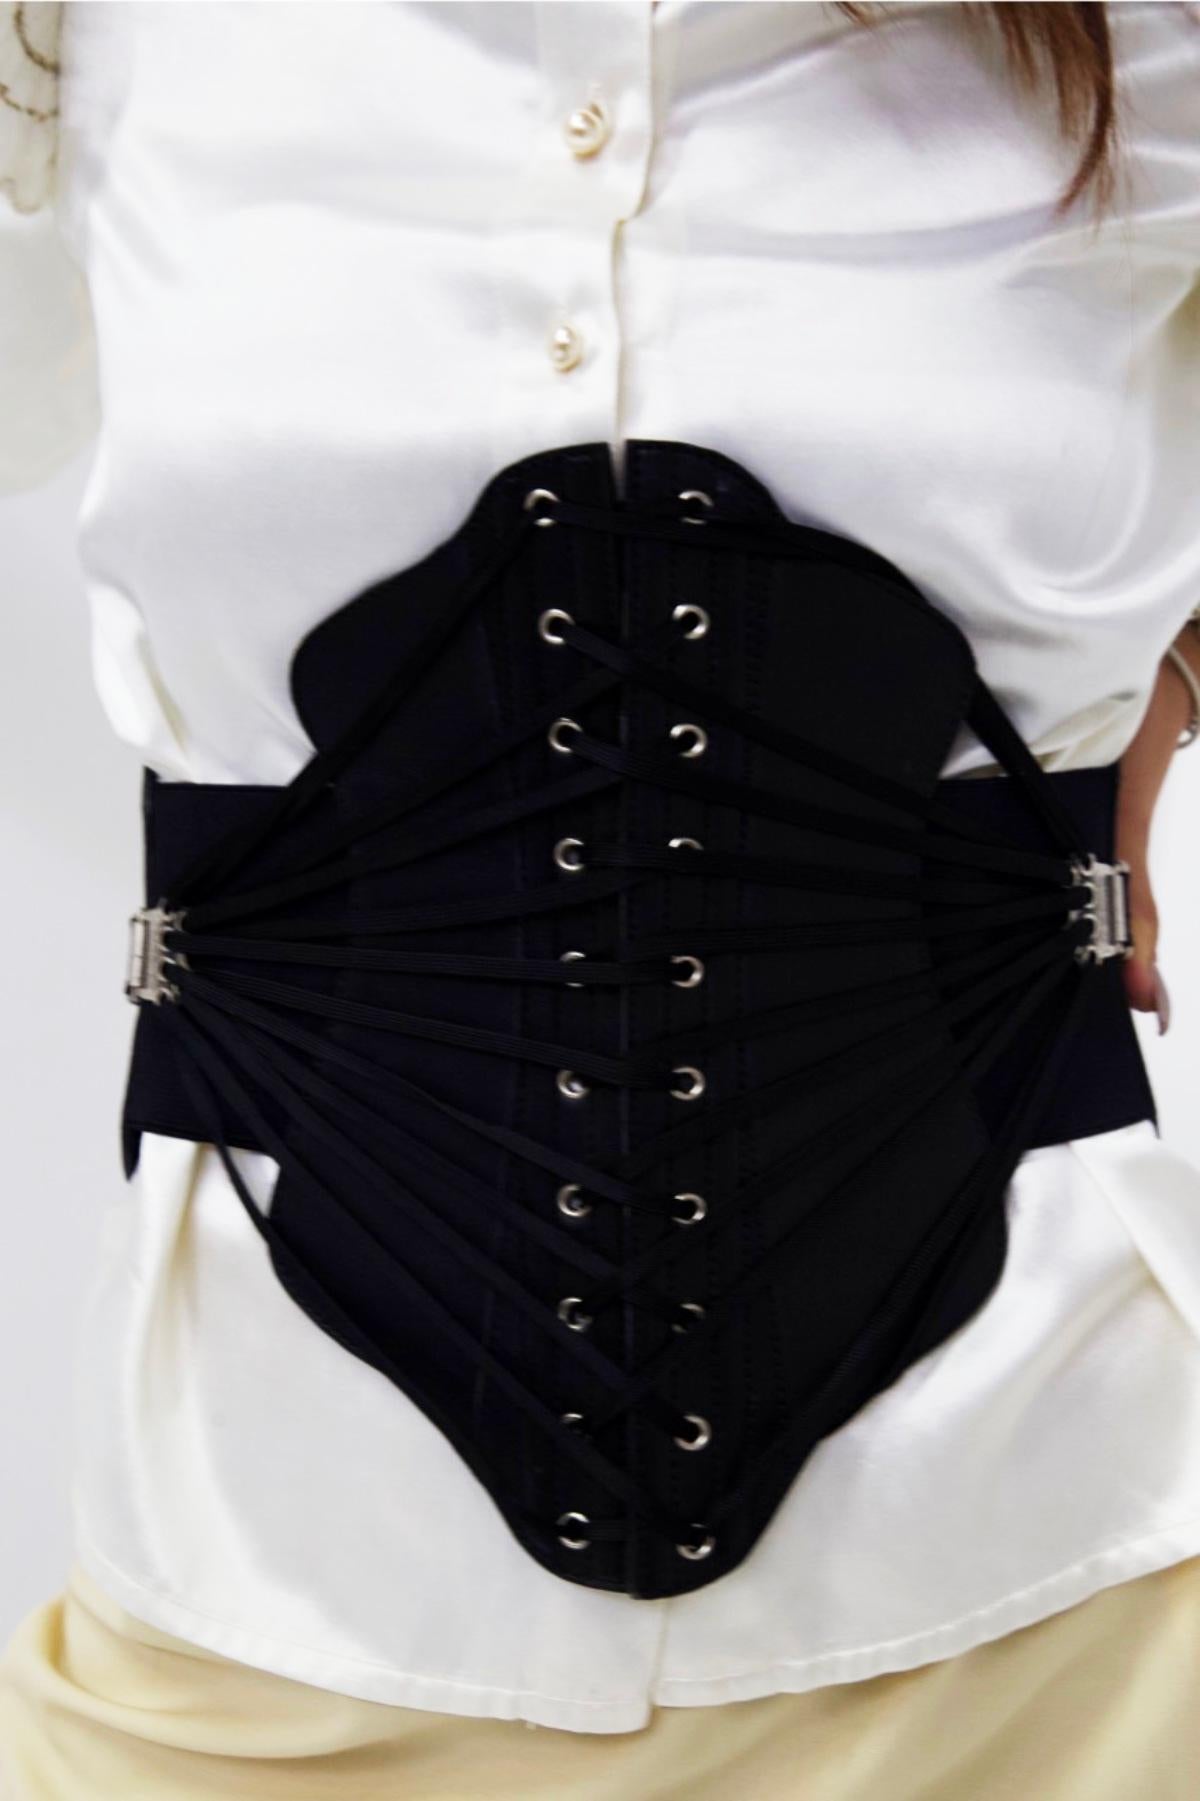 Very rare corset belt designed by Jean Paul Gaultier in the 1980s, made in France.
ORIGINAL LABEL.
The belt is really wide and takes up the whole bodice, so much so that one of its main uses is to act as a corset.
The belt is entirely made of shiny